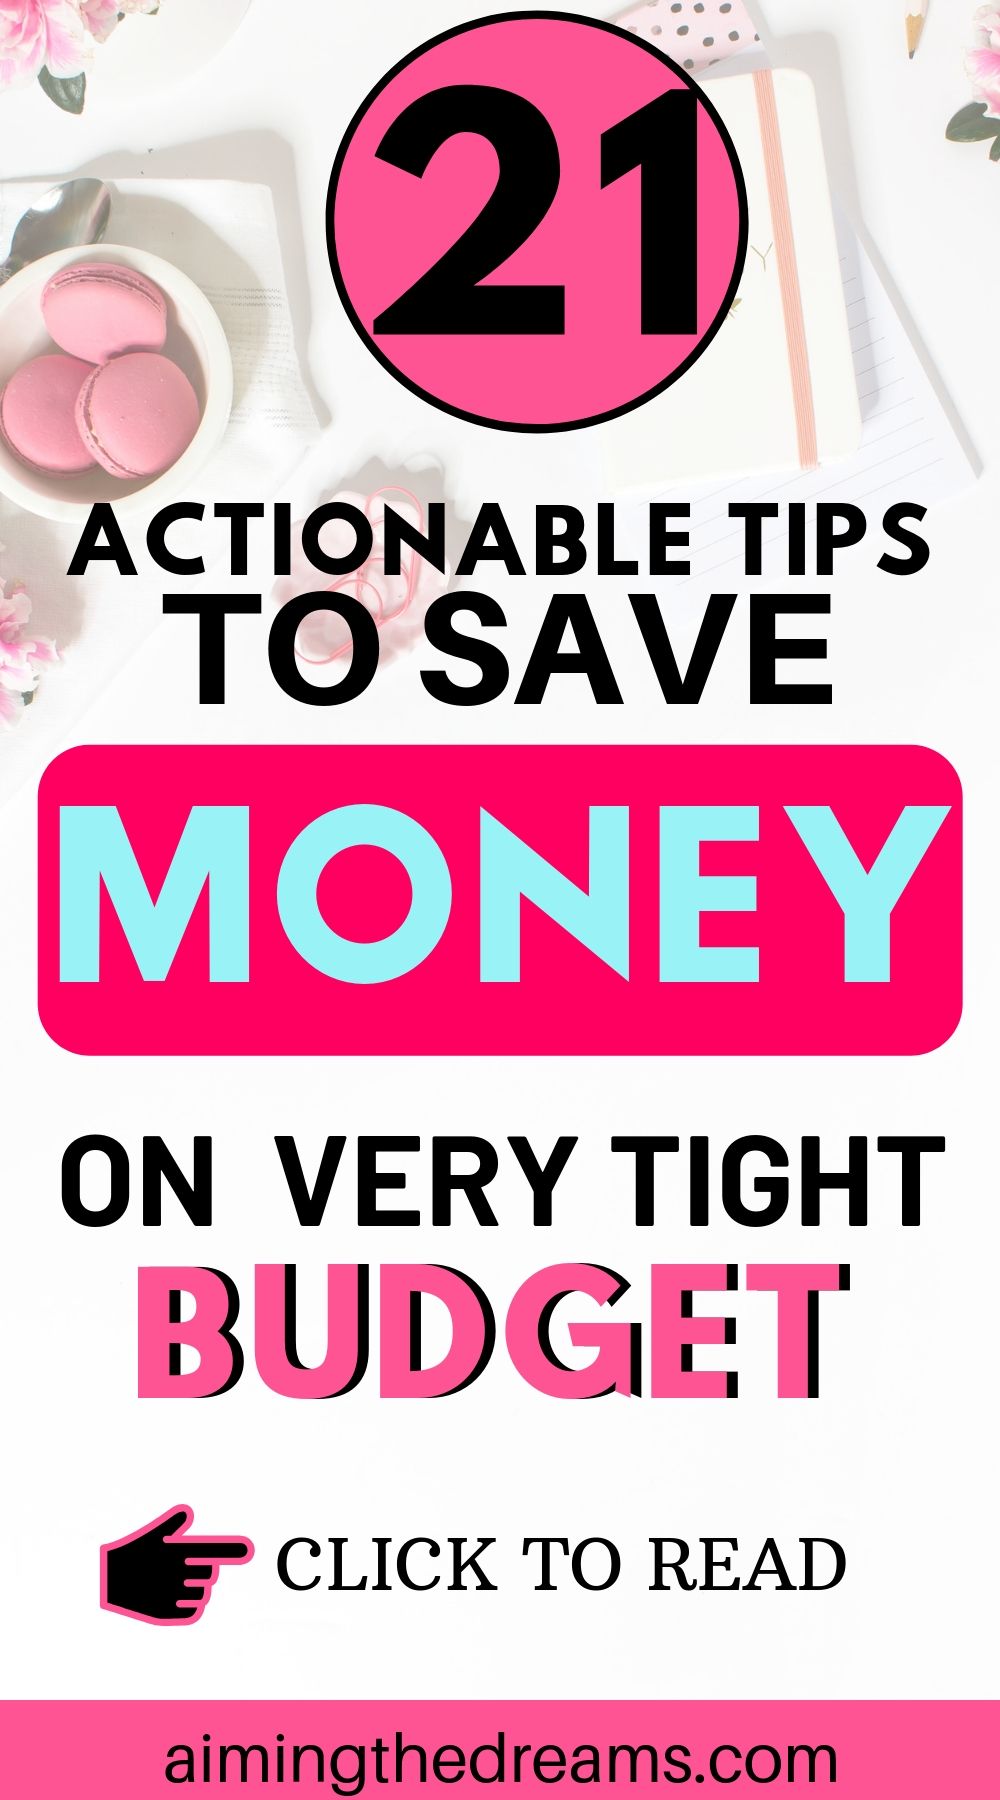 21 tips to save money on very tight budget